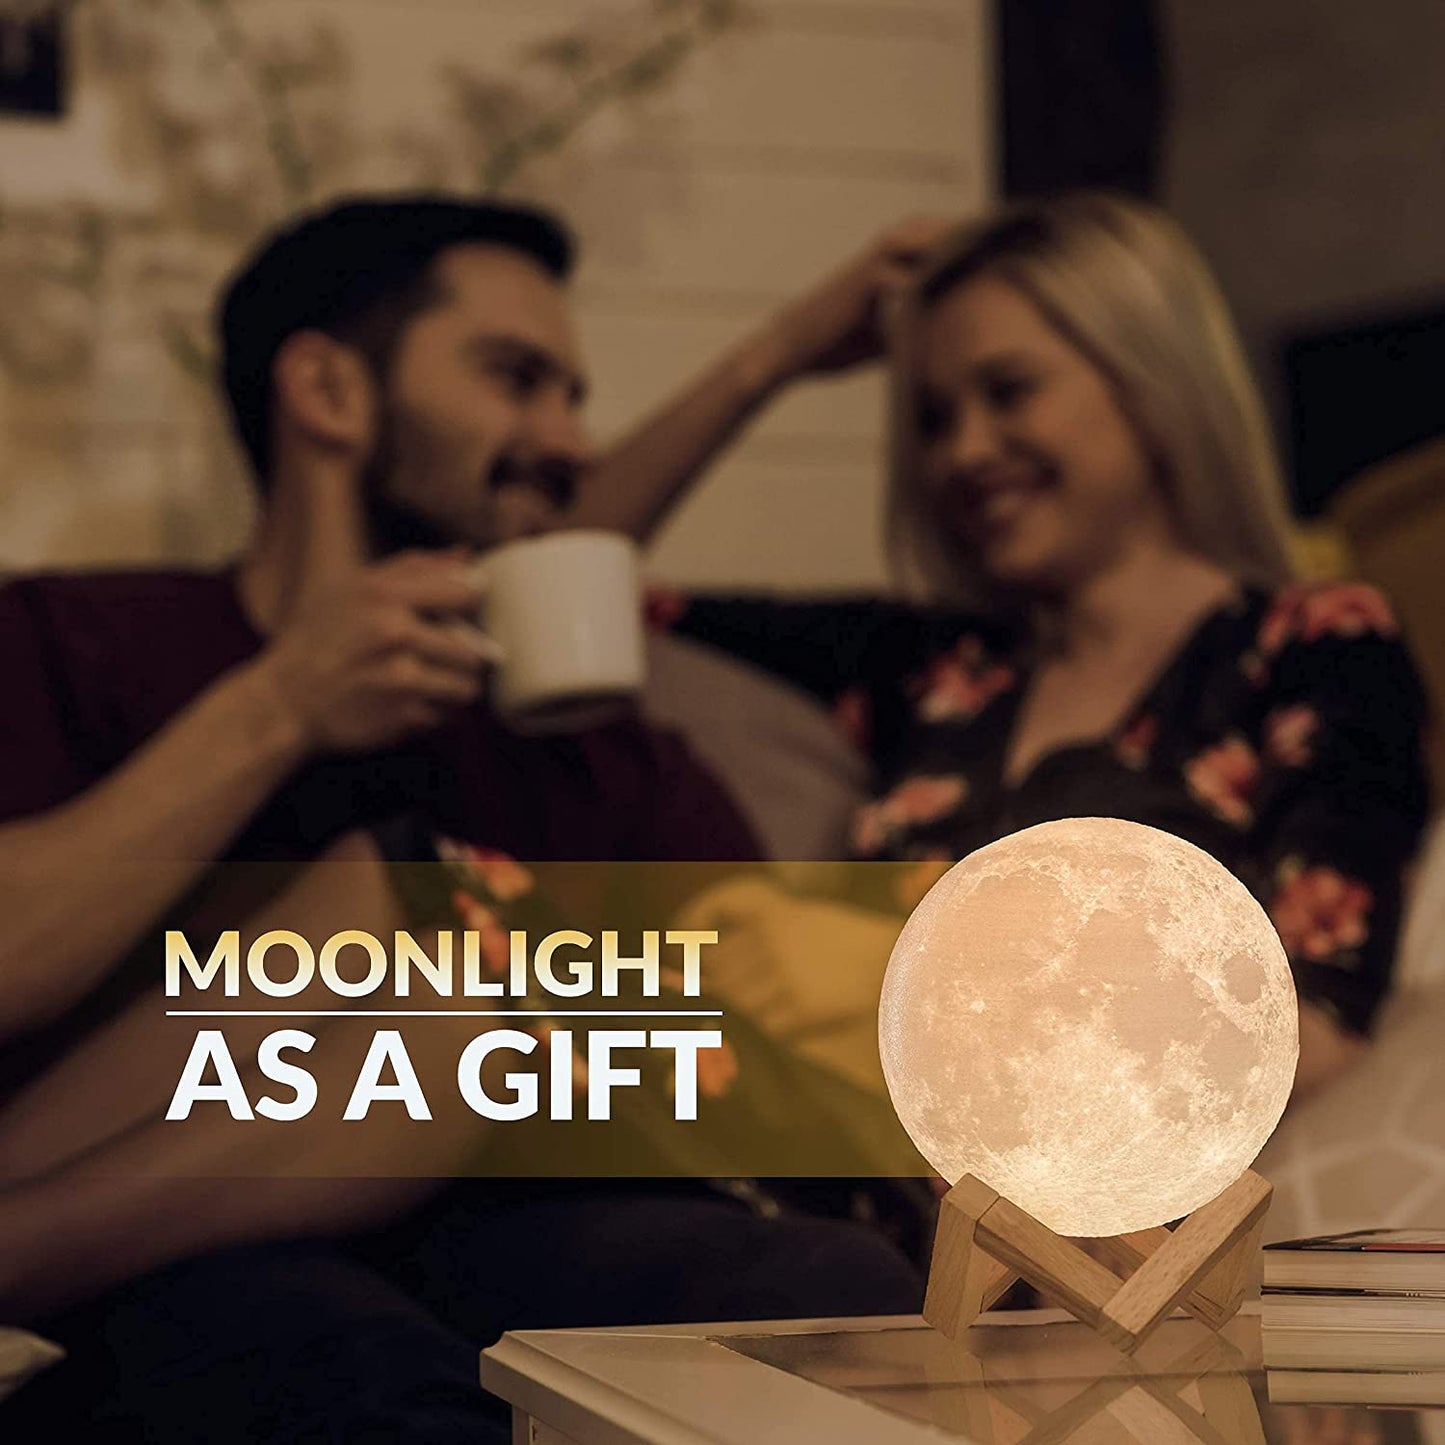 3D Moon Lamp by Mind-glowing - Kids Moon Night Light, 4.7 inch, 16 LED Colors, Wood Stand, Remote Control, Cool Birthday Gift for 9 10 11 12 Year Old Girls, Cute Astrology Bedroom Moon Decor for Women